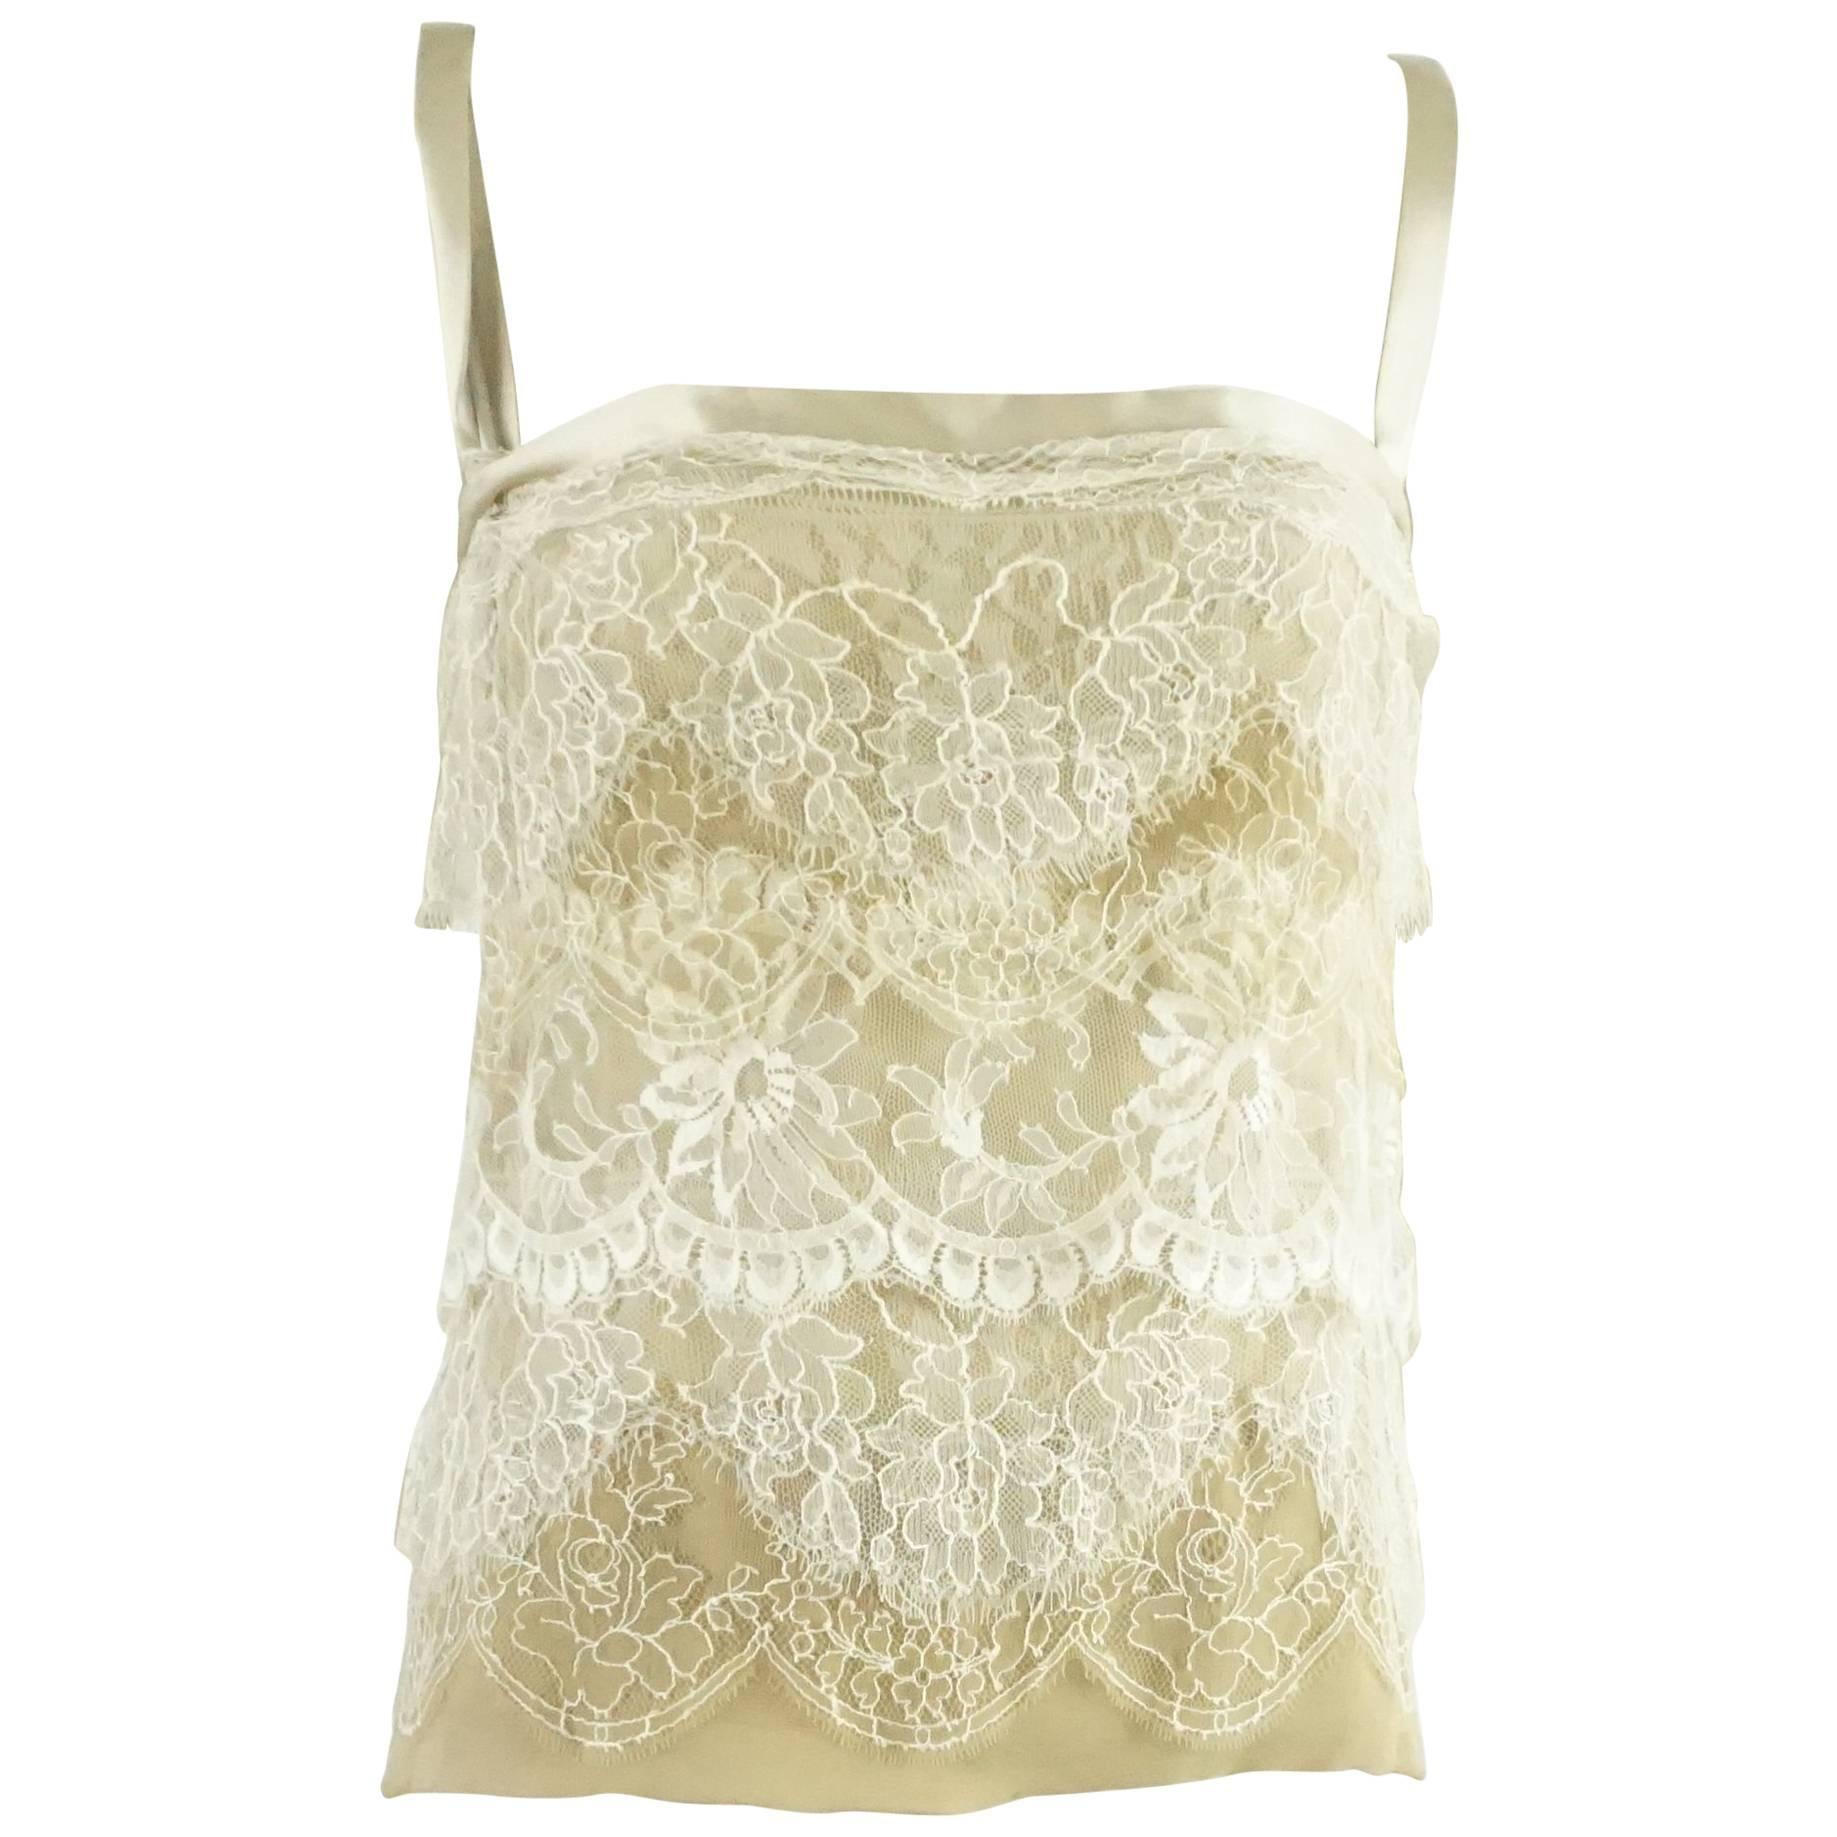 Dolce & Gabbana Tan and Ivory Lace Silk Blend Camisole and Bra - 44